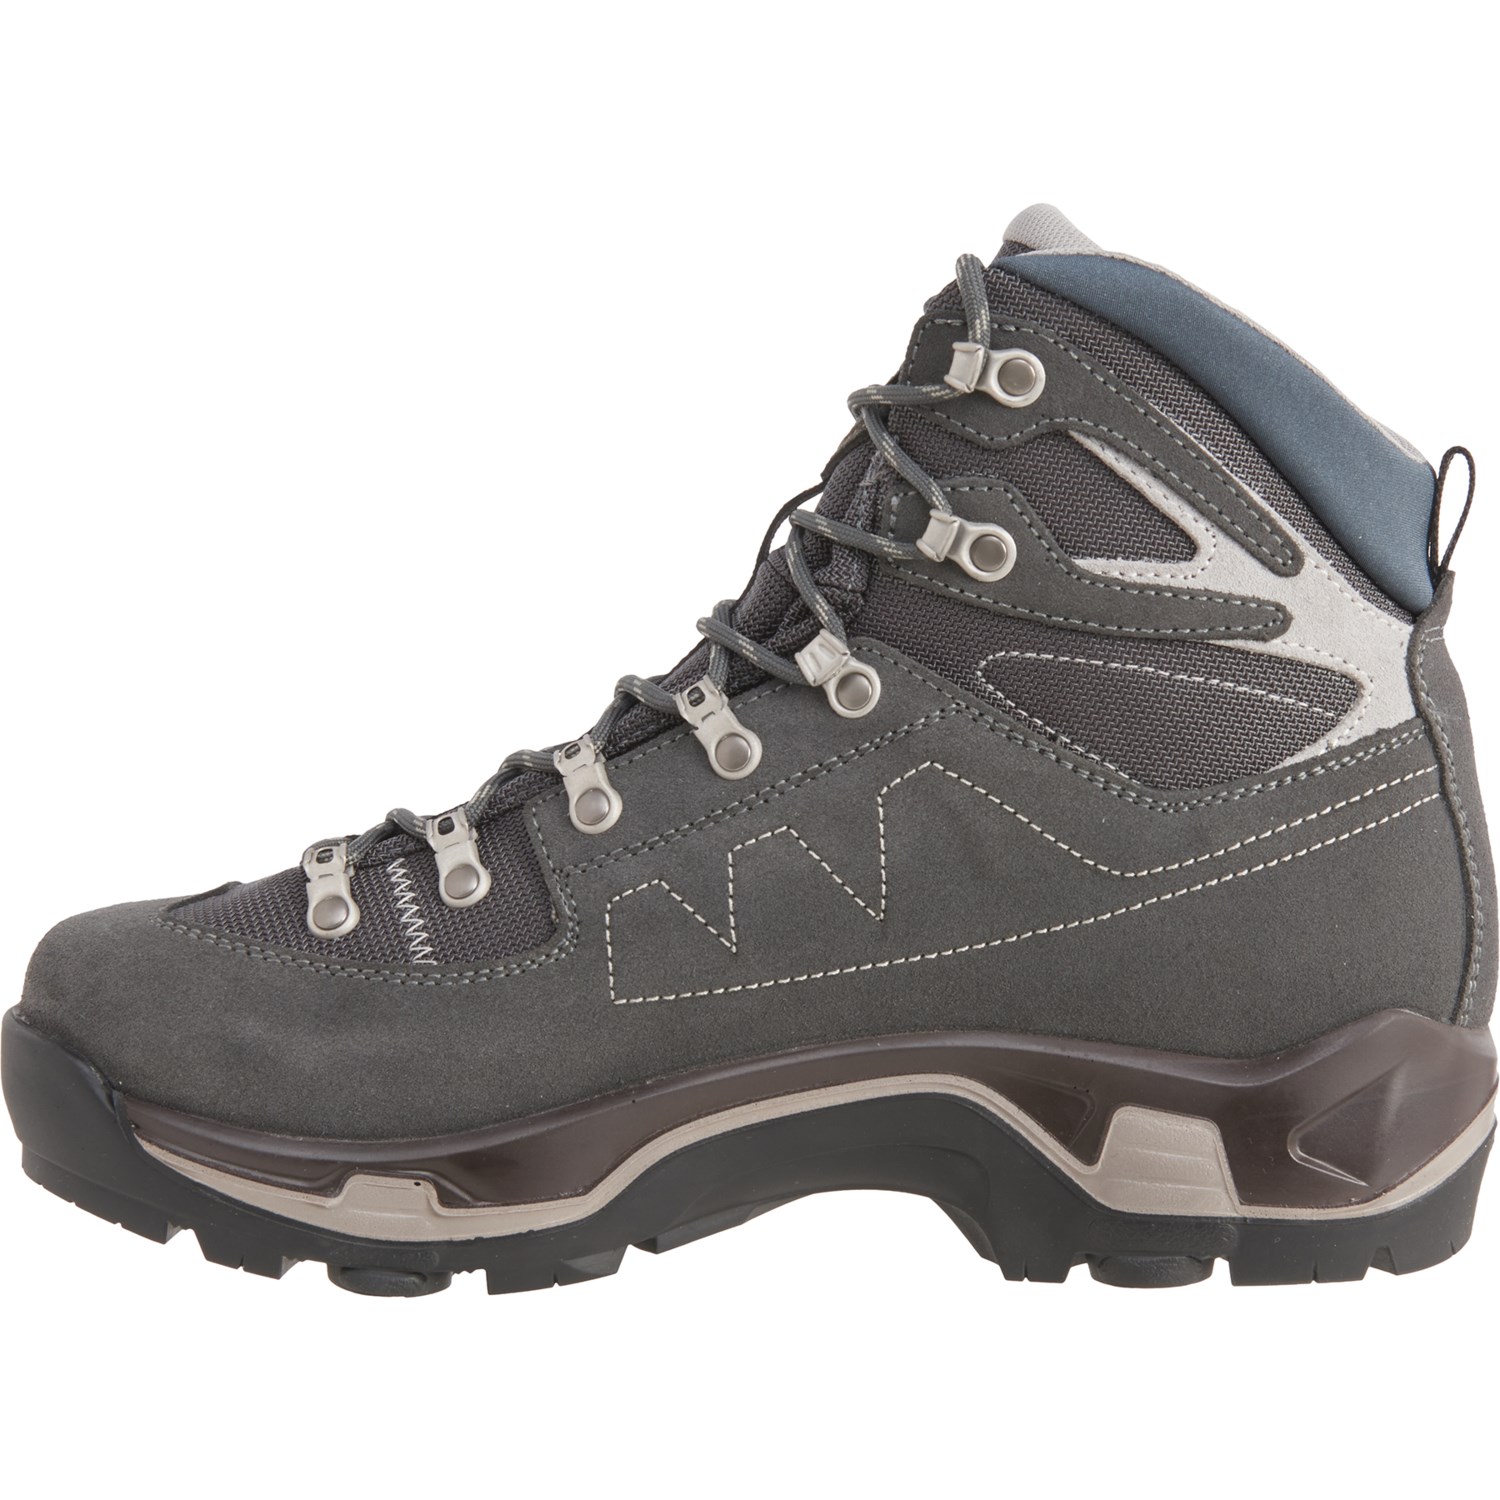 Asolo TPS Equalon GV Gore-Tex® Hiking Boots (For Men) - Save 50%